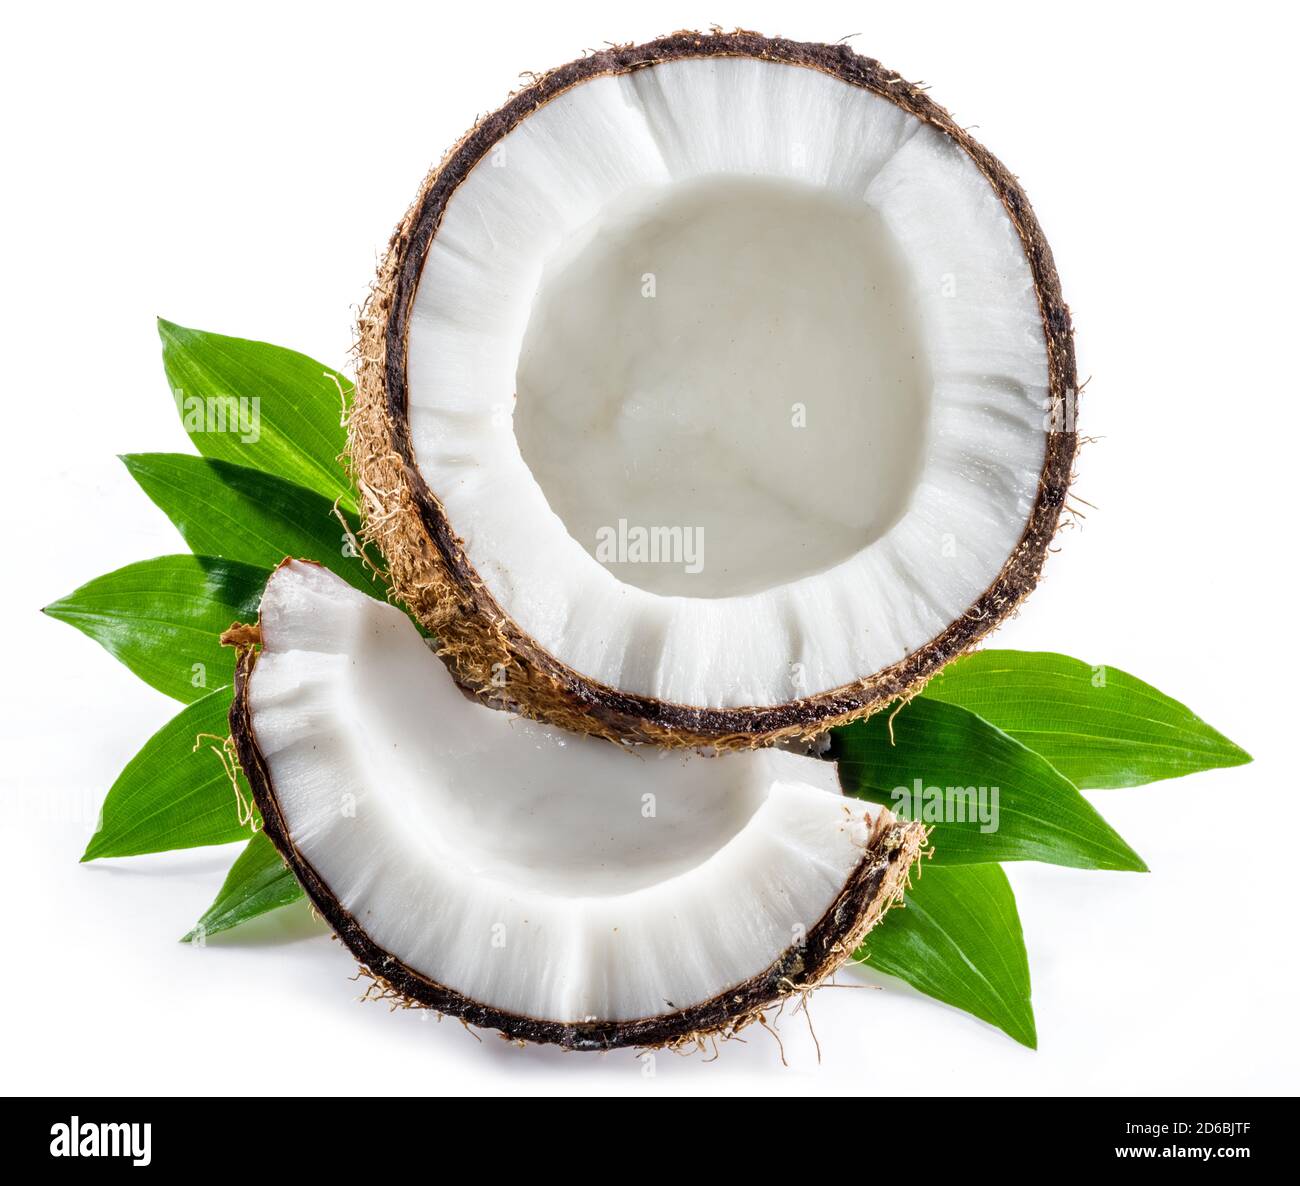 Cracked coconut fruit with white flesh and a piece of coconut isolated on white background. Stock Photo